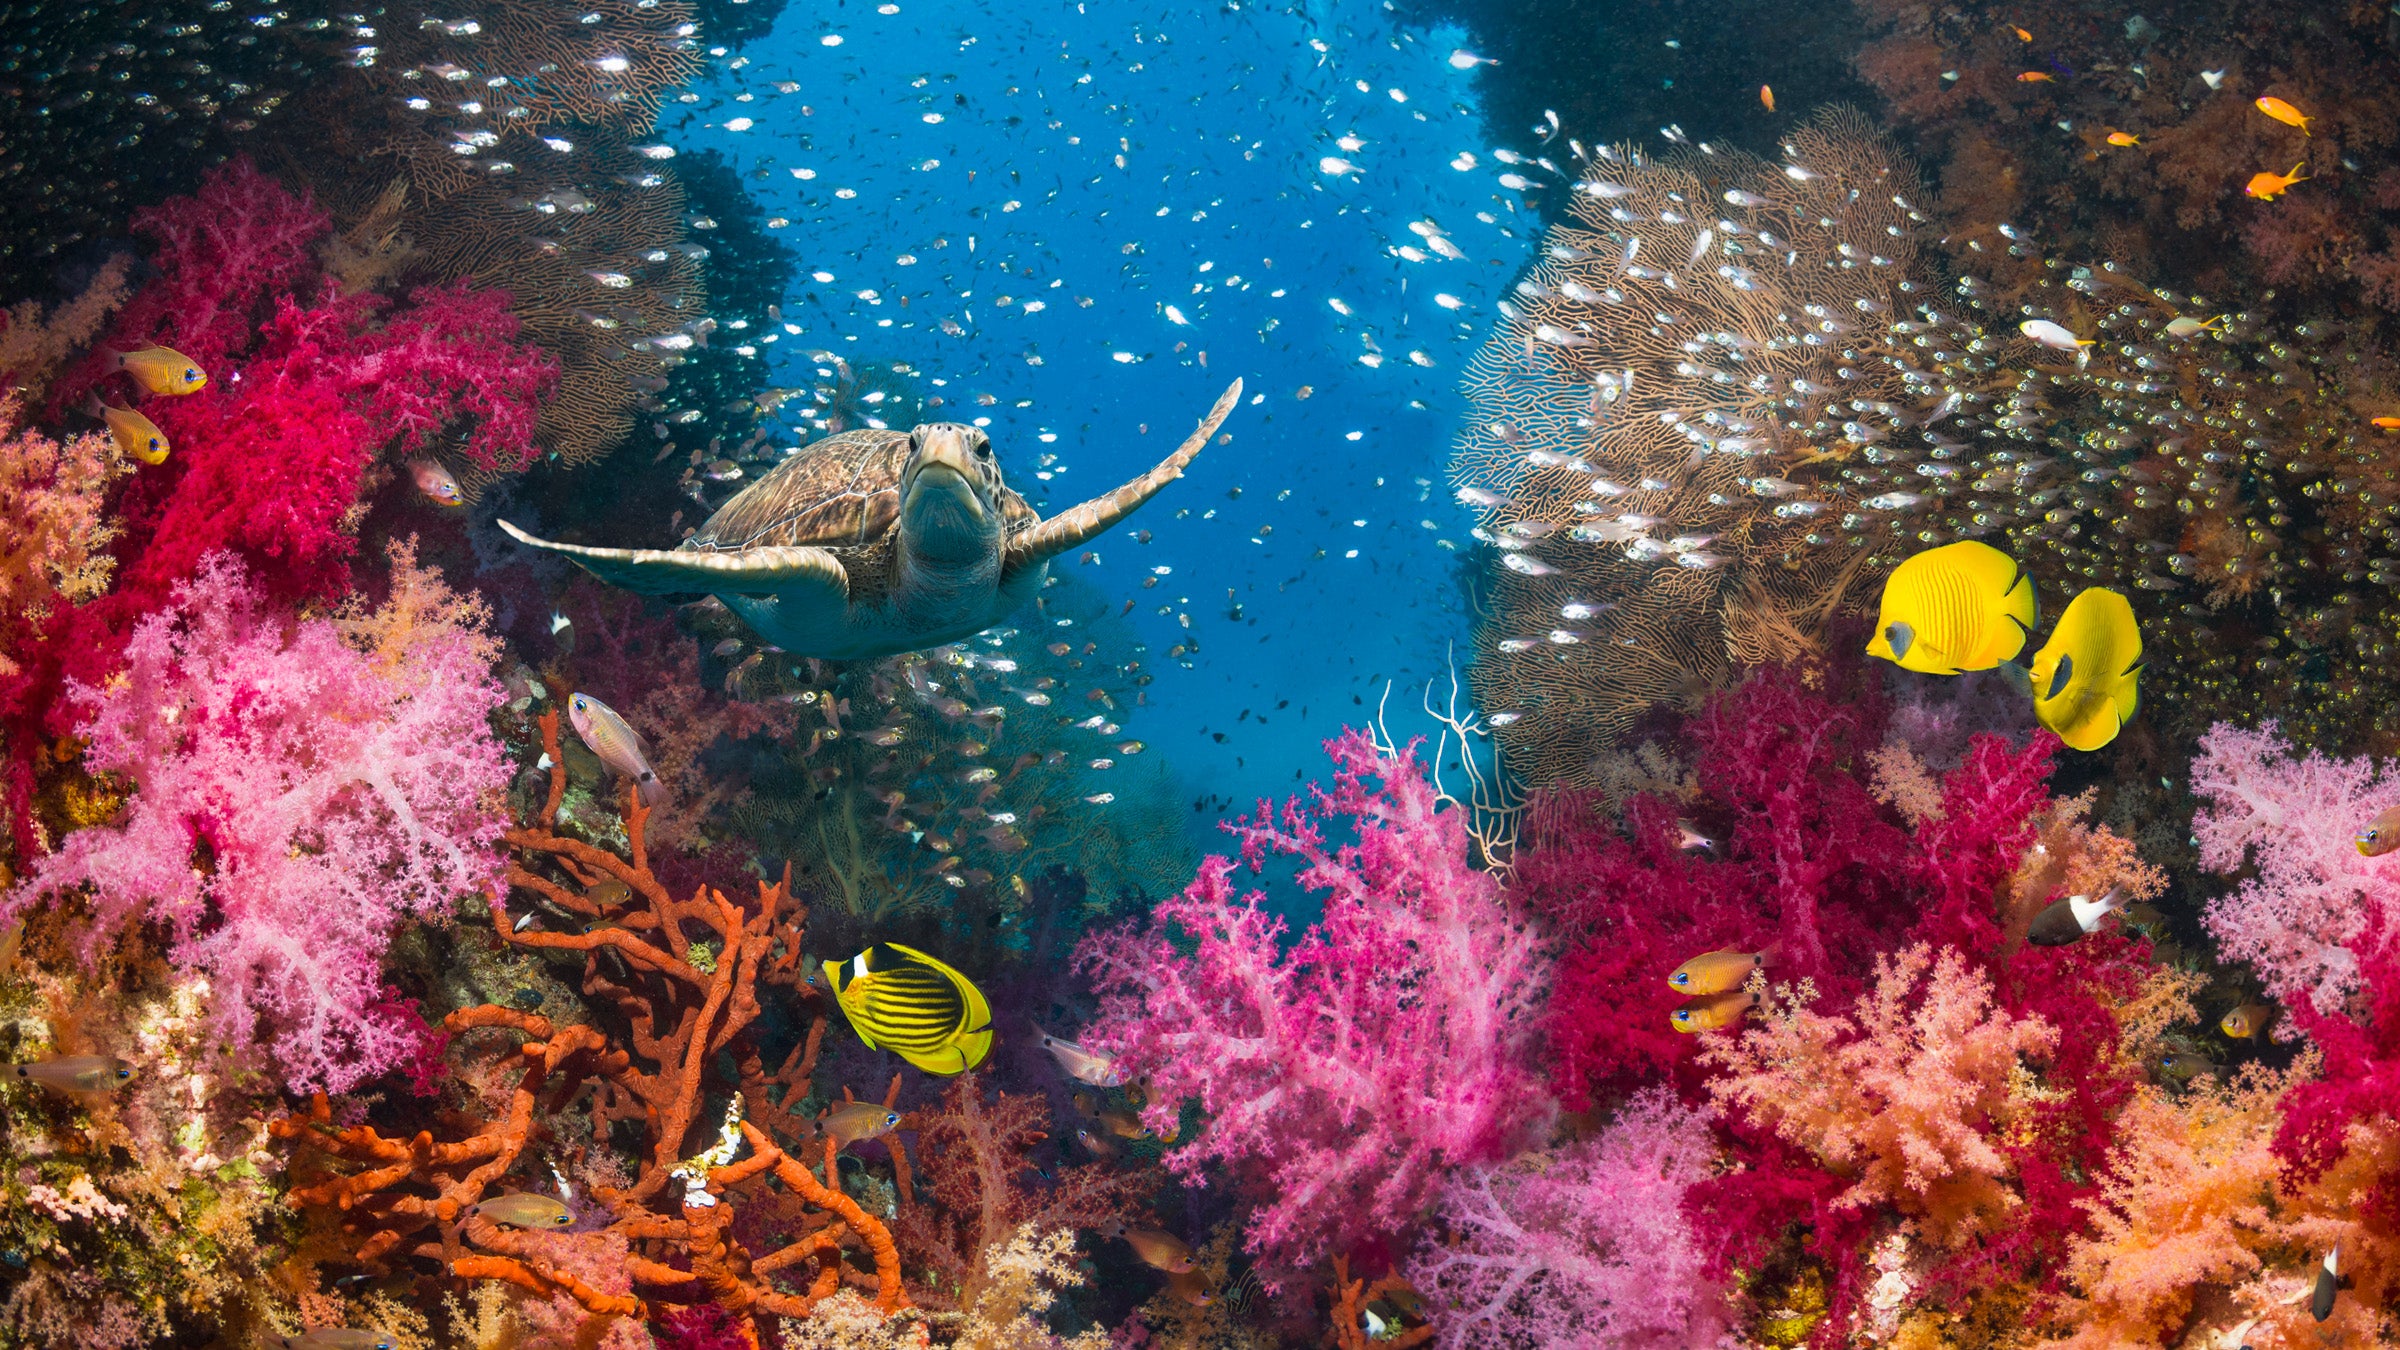 Why Your Next Outdoor Adventure Should Be to a Coral Reef